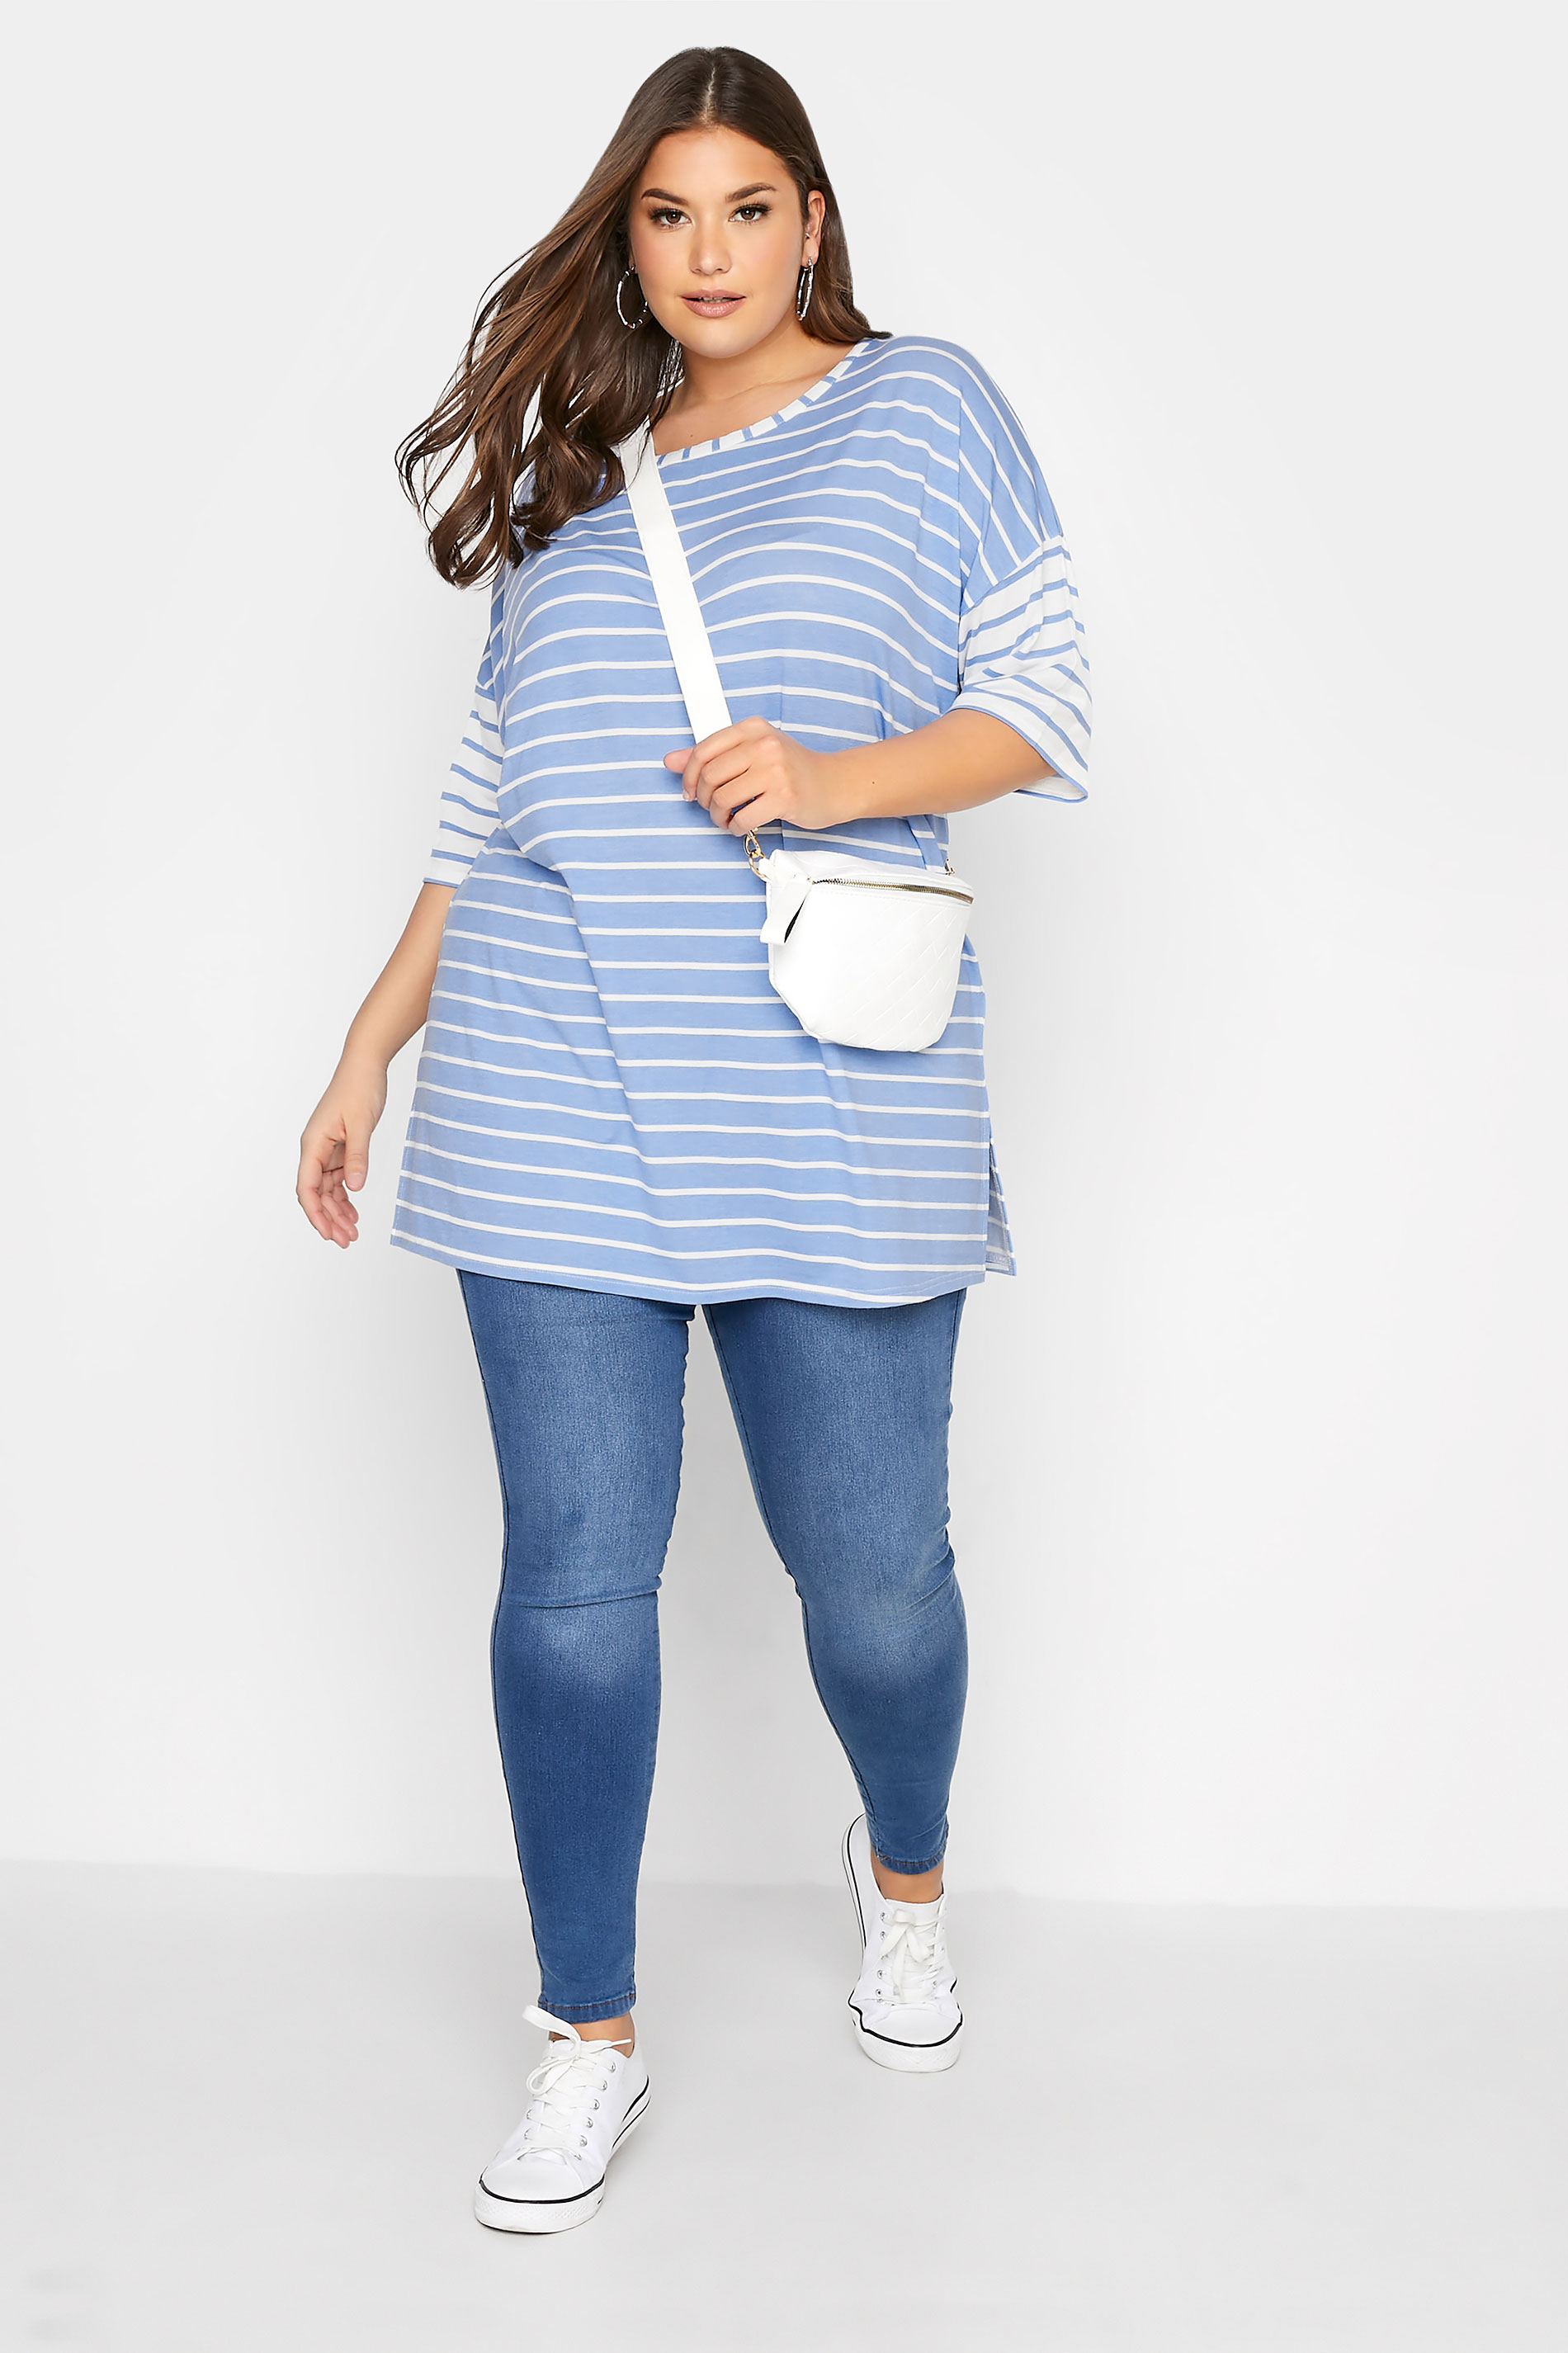 Grande taille  Tops Grande taille  Tops Casual | LIMITED COLLECTION - T-Shirt Oversize Bleu Ciel à Rayures - XO18076